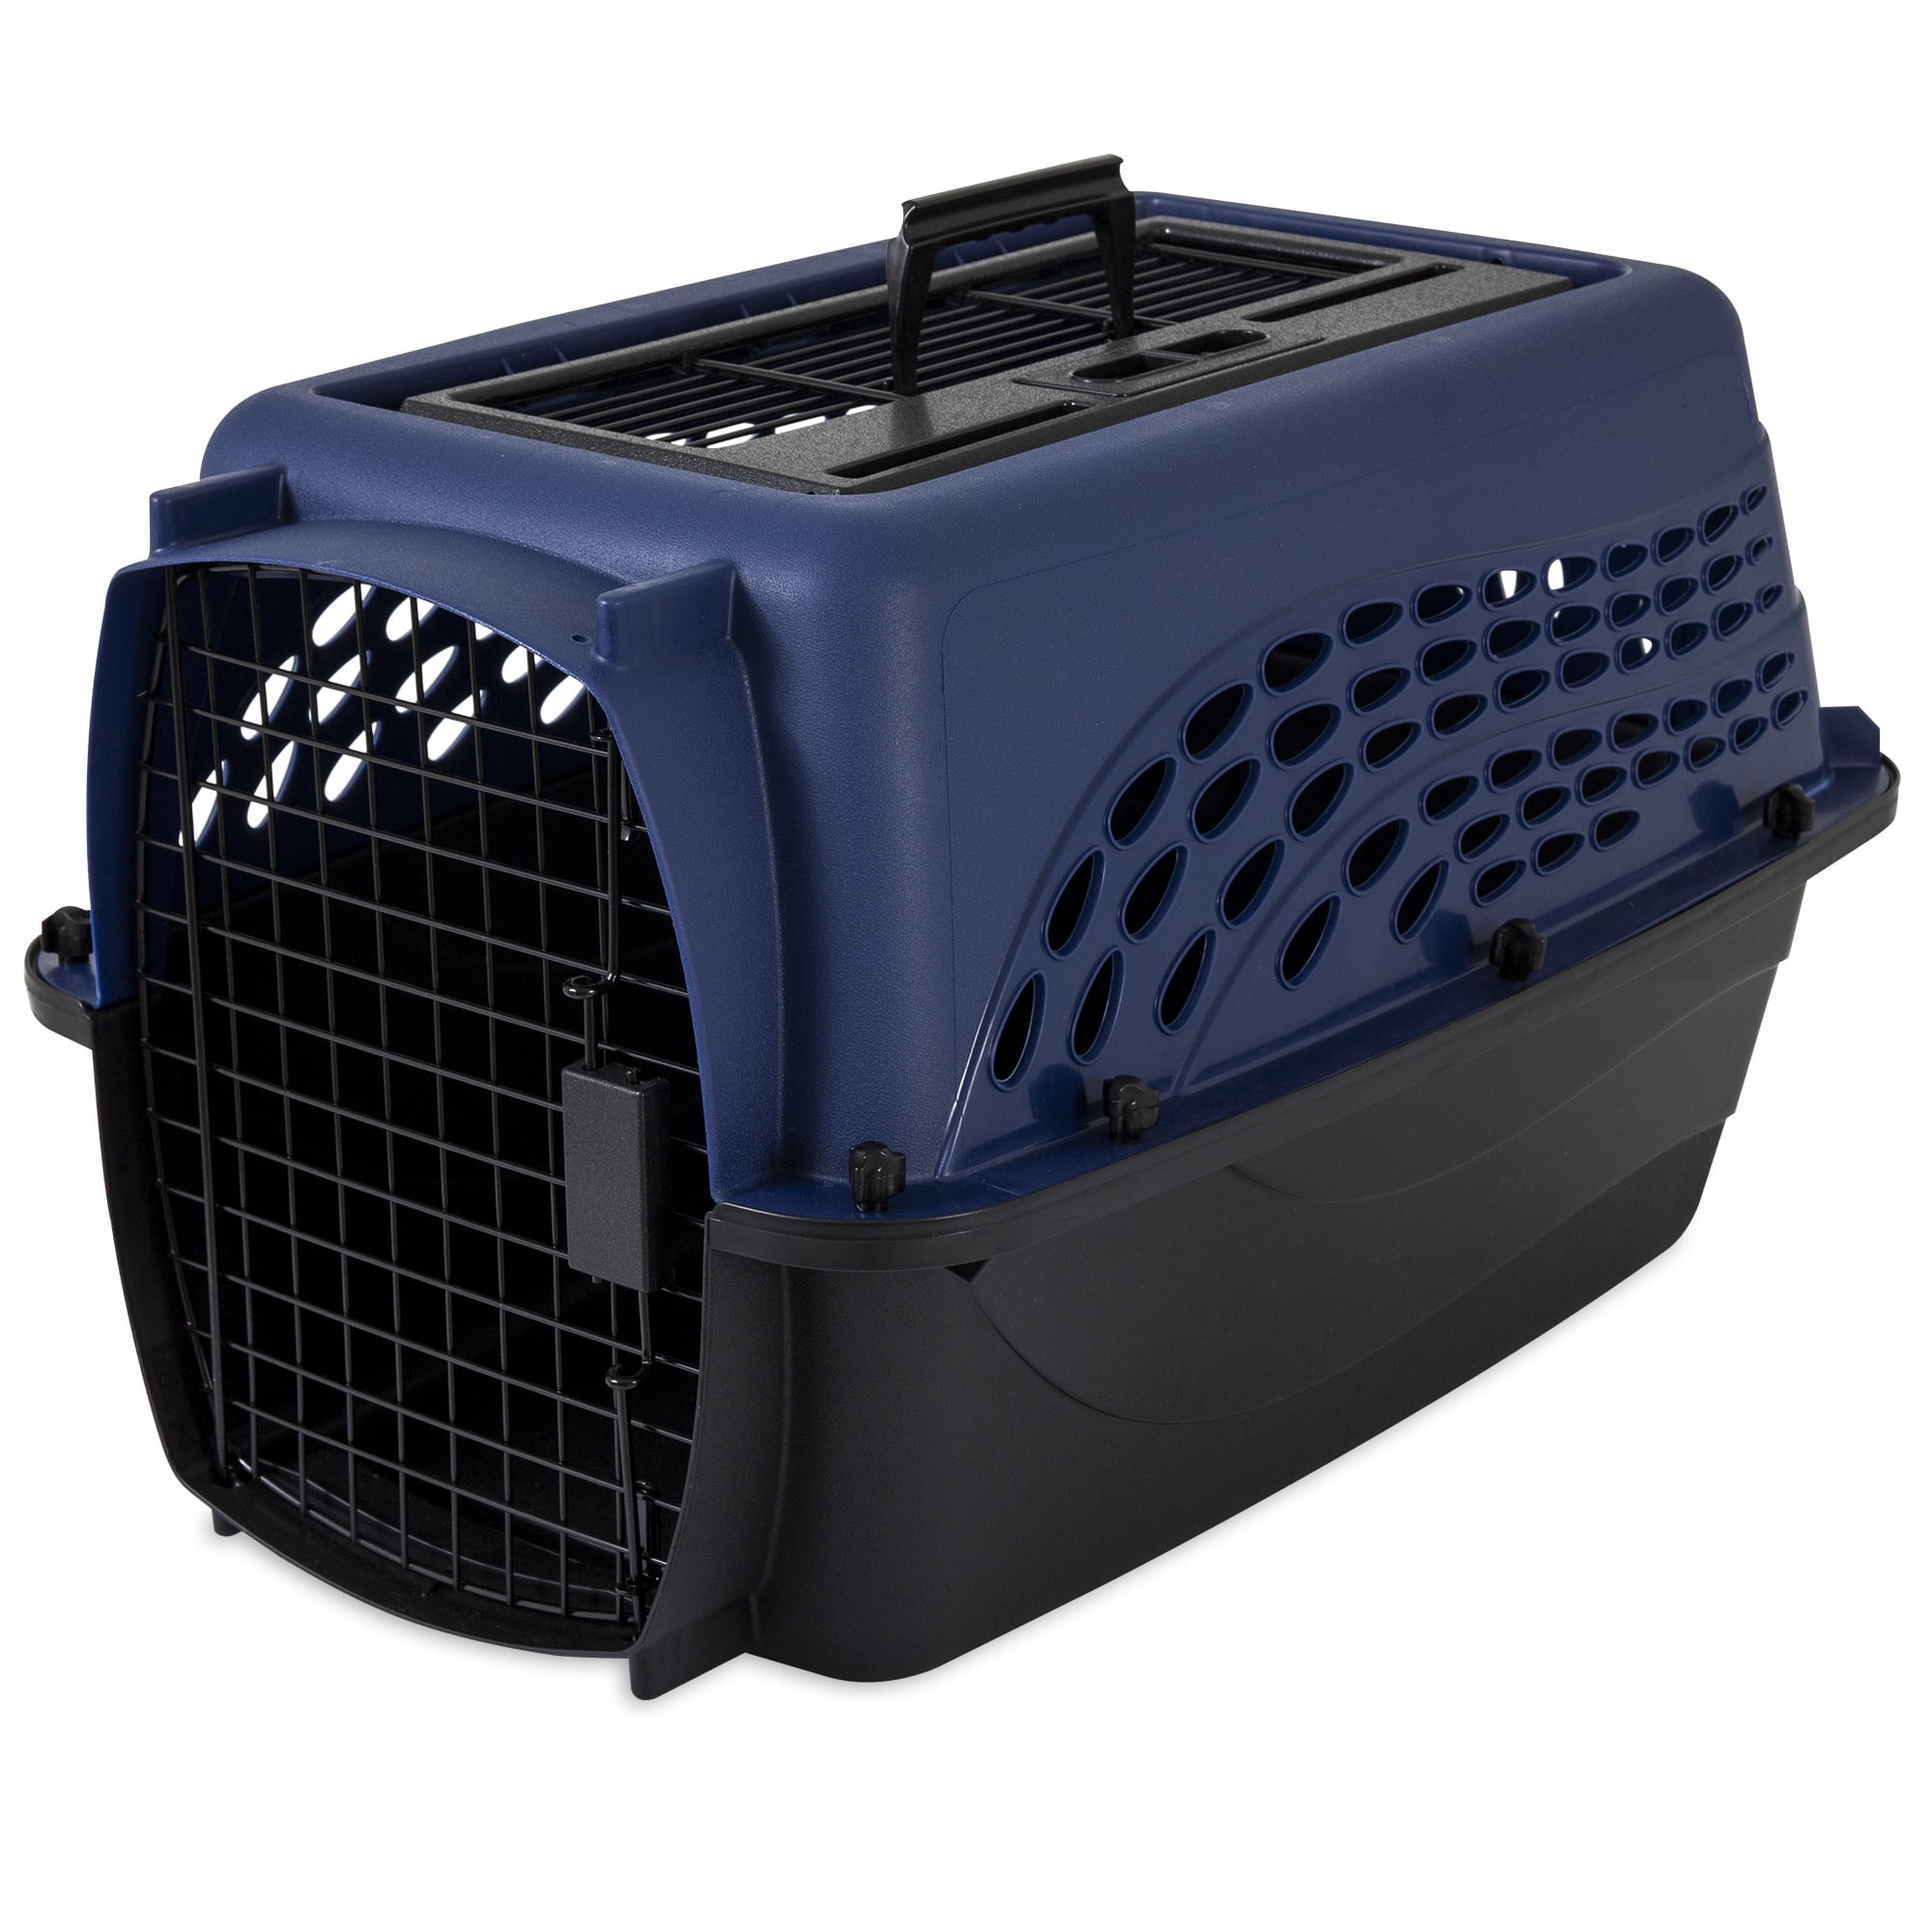 Vibrant Life 2-Door Top load Dog Kennel, Blue, Small, 24in Length